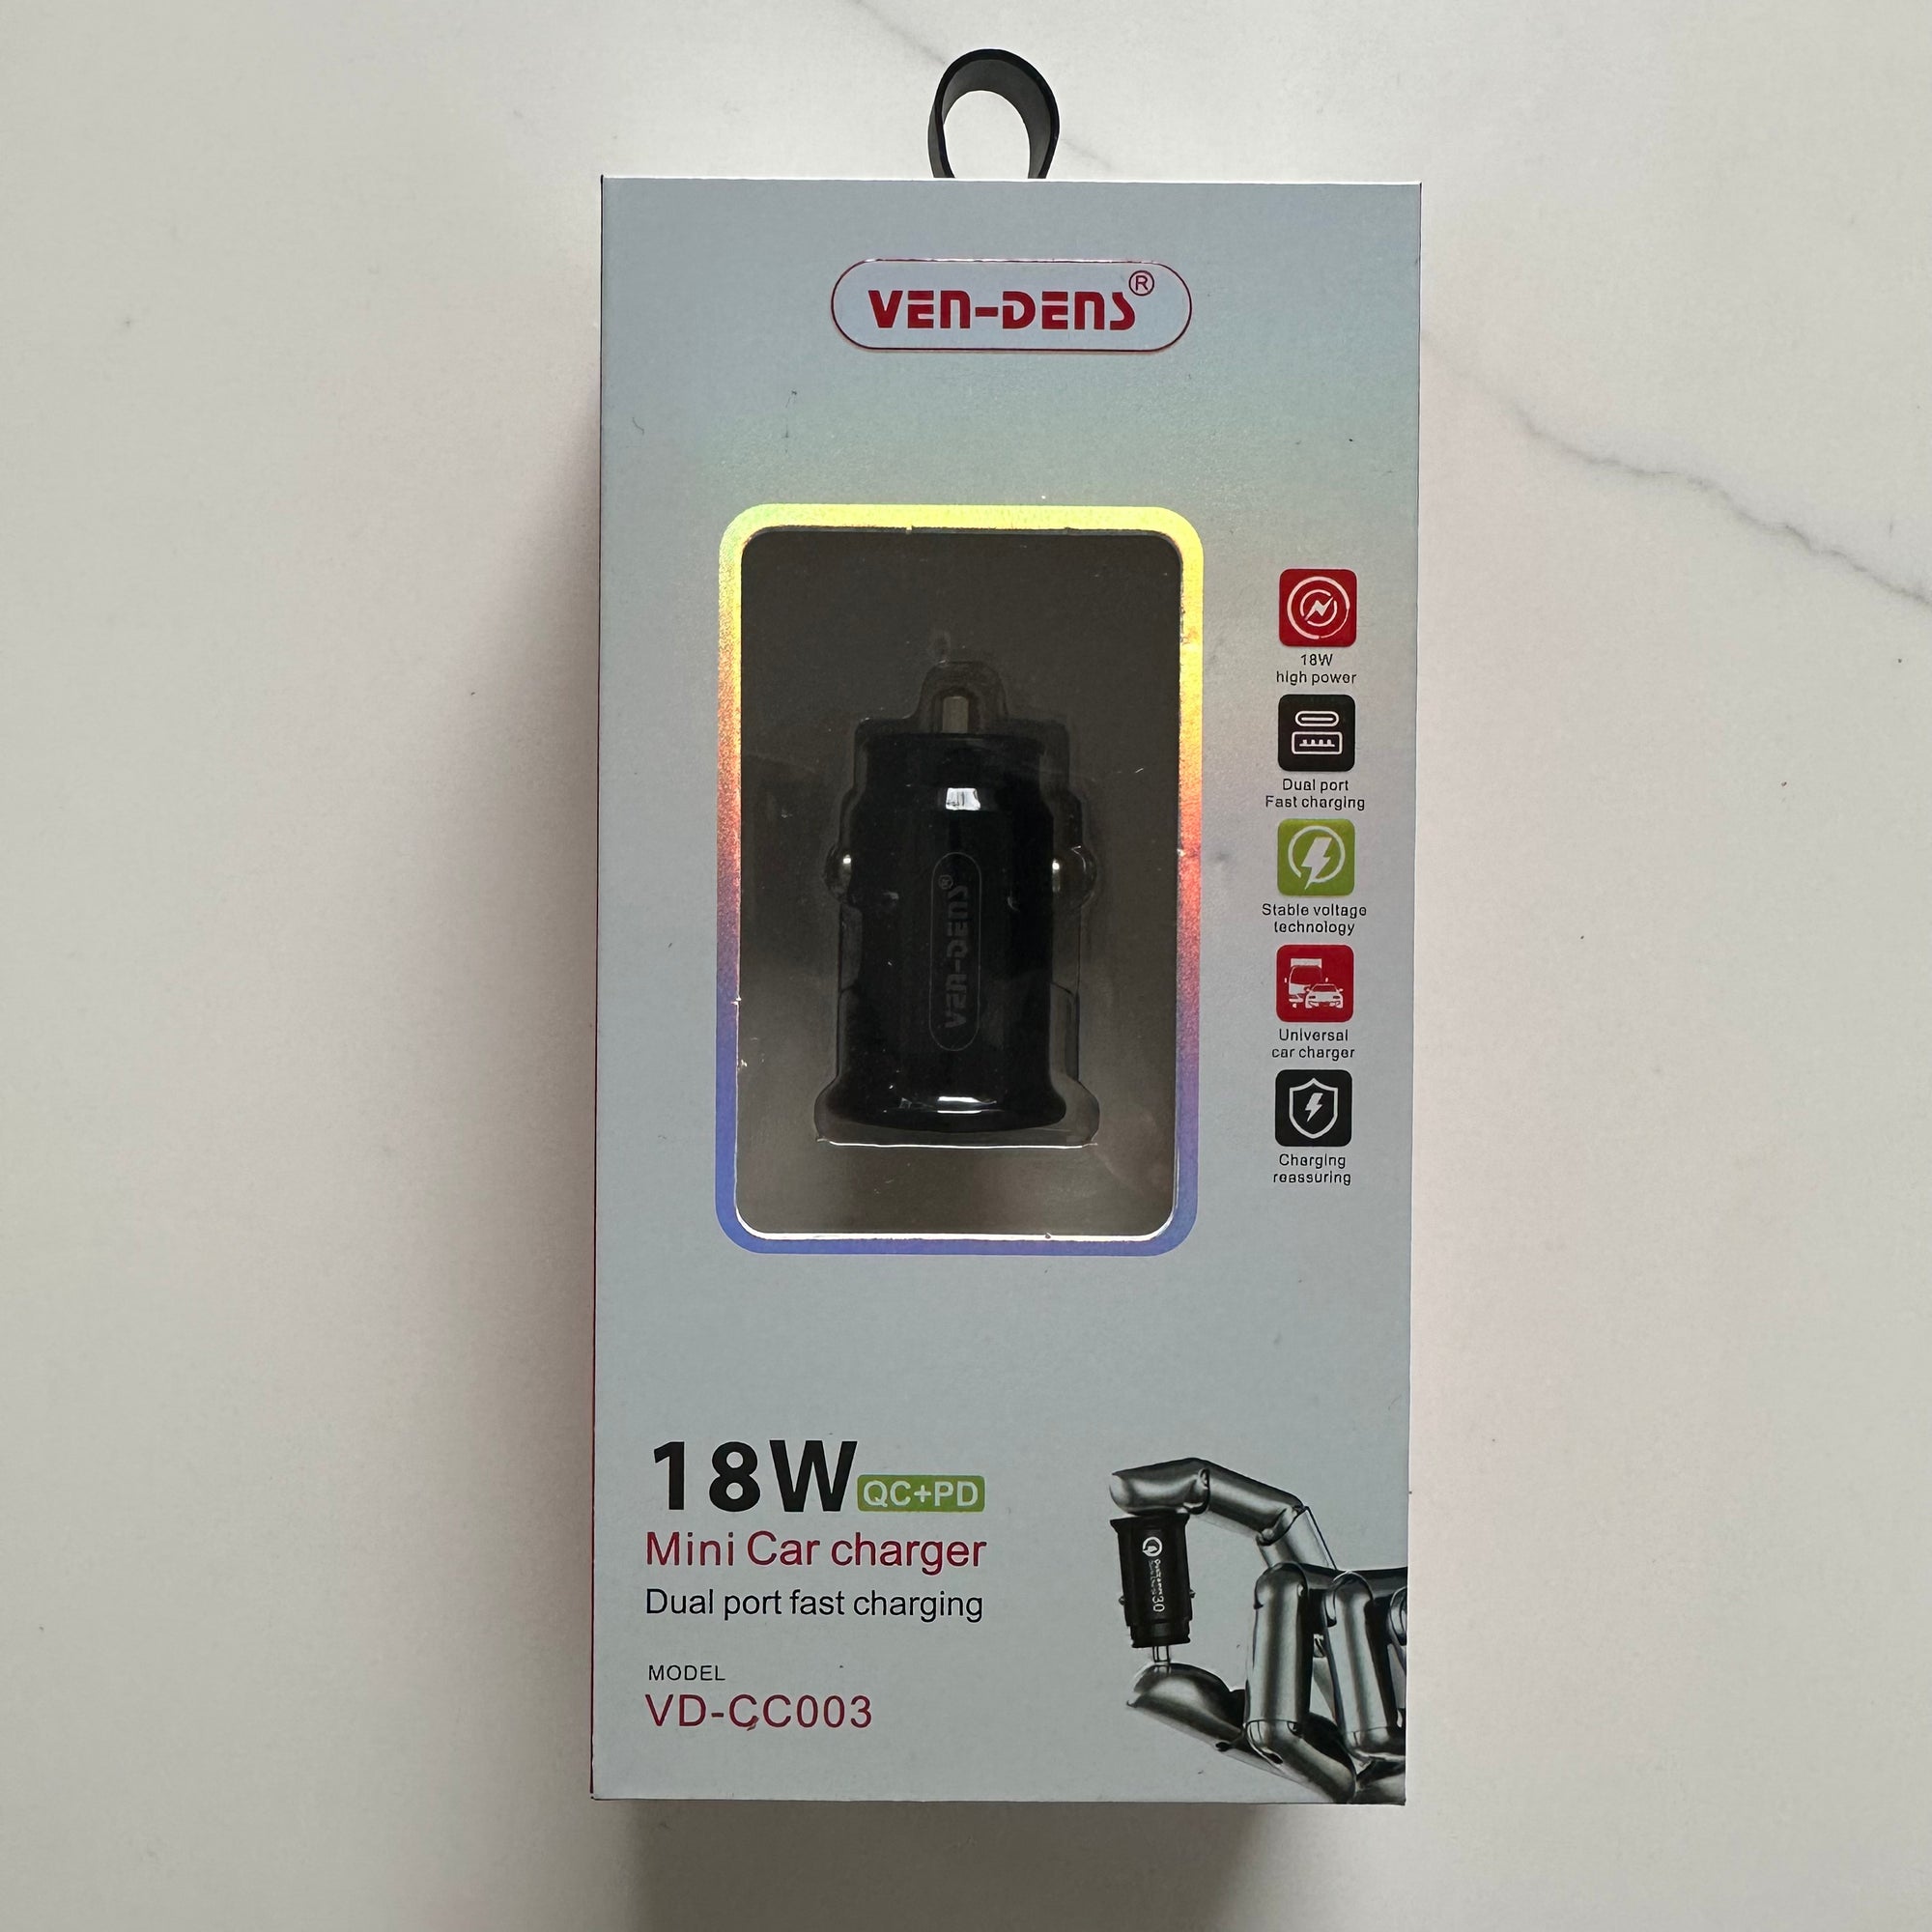 Ven dens 18w Fast in Car Cigar charging Plug with USB & Type C